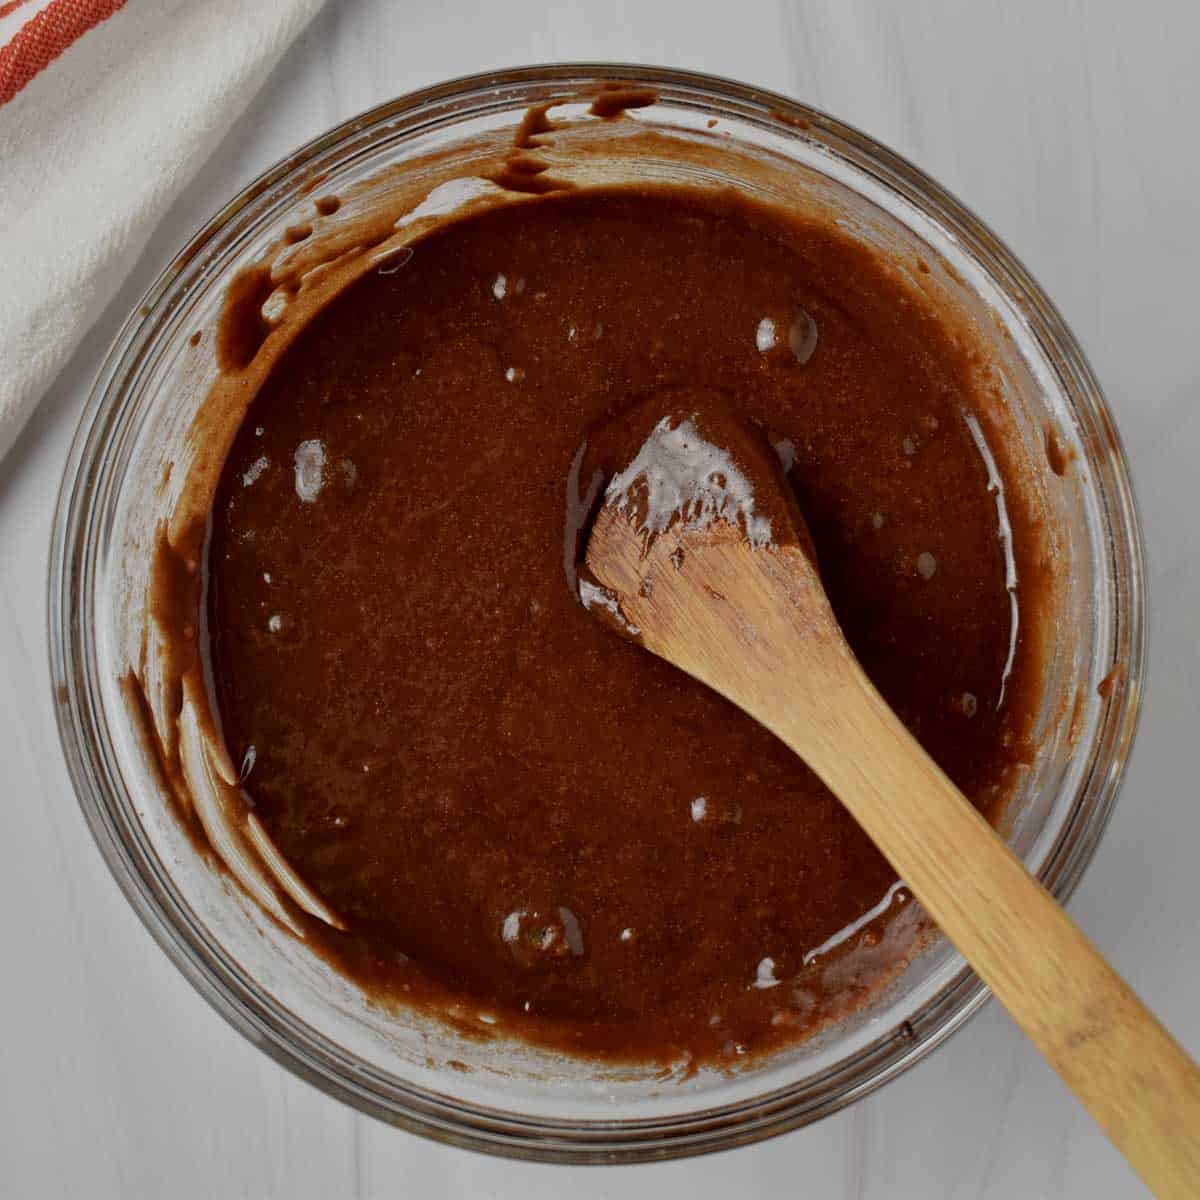 Rocky road brownie batter and wooden spoon in glass mixing bowl.